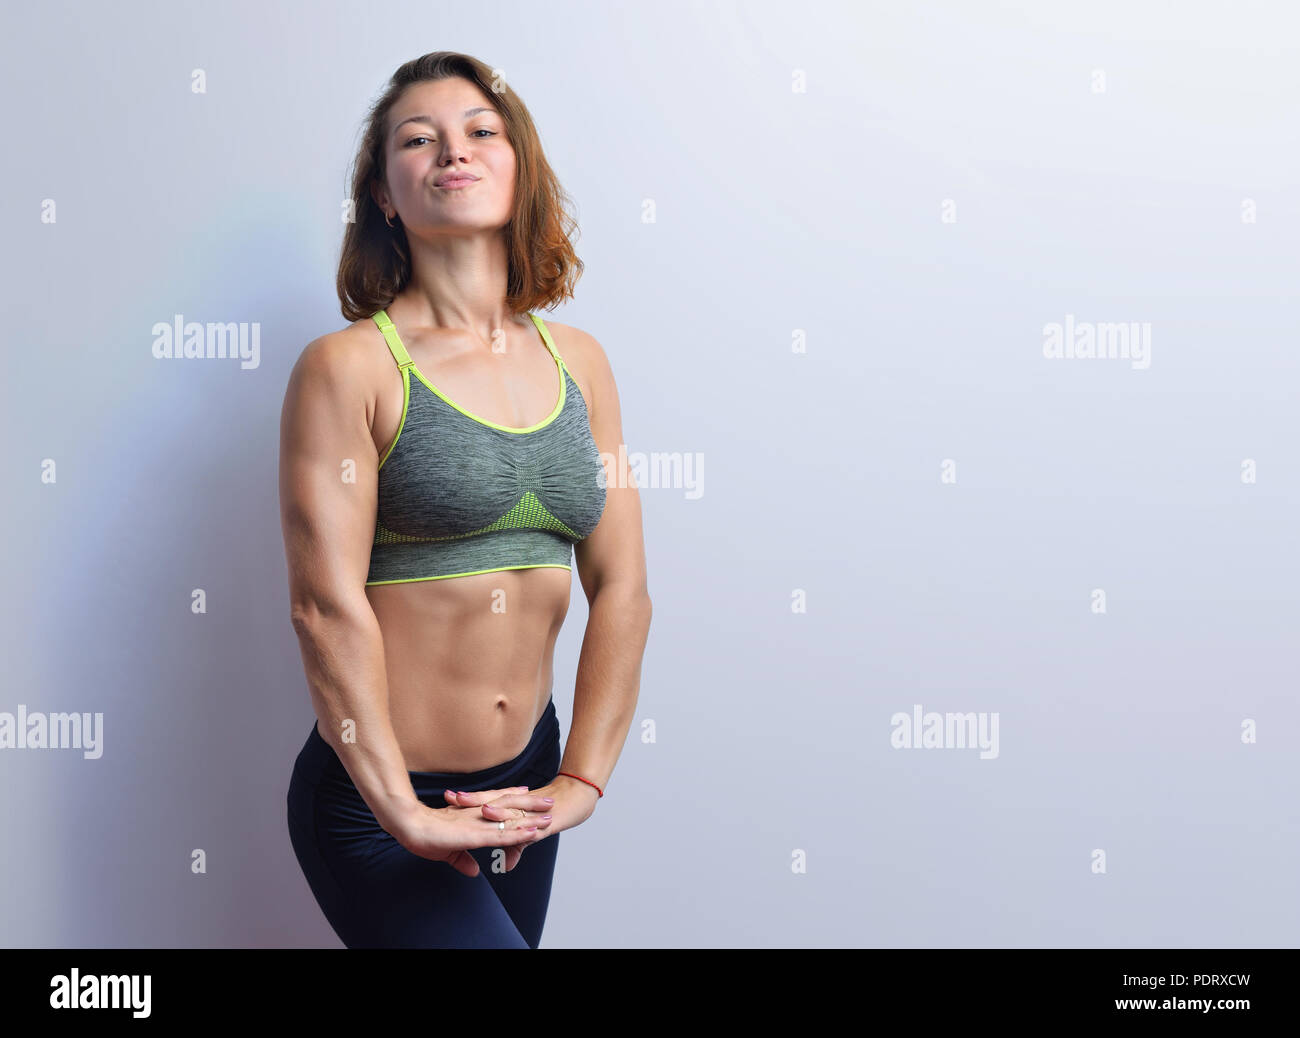 Slim young fitness woman showing muscles in a grey top black leggings isolated on a white background. Stock Photo